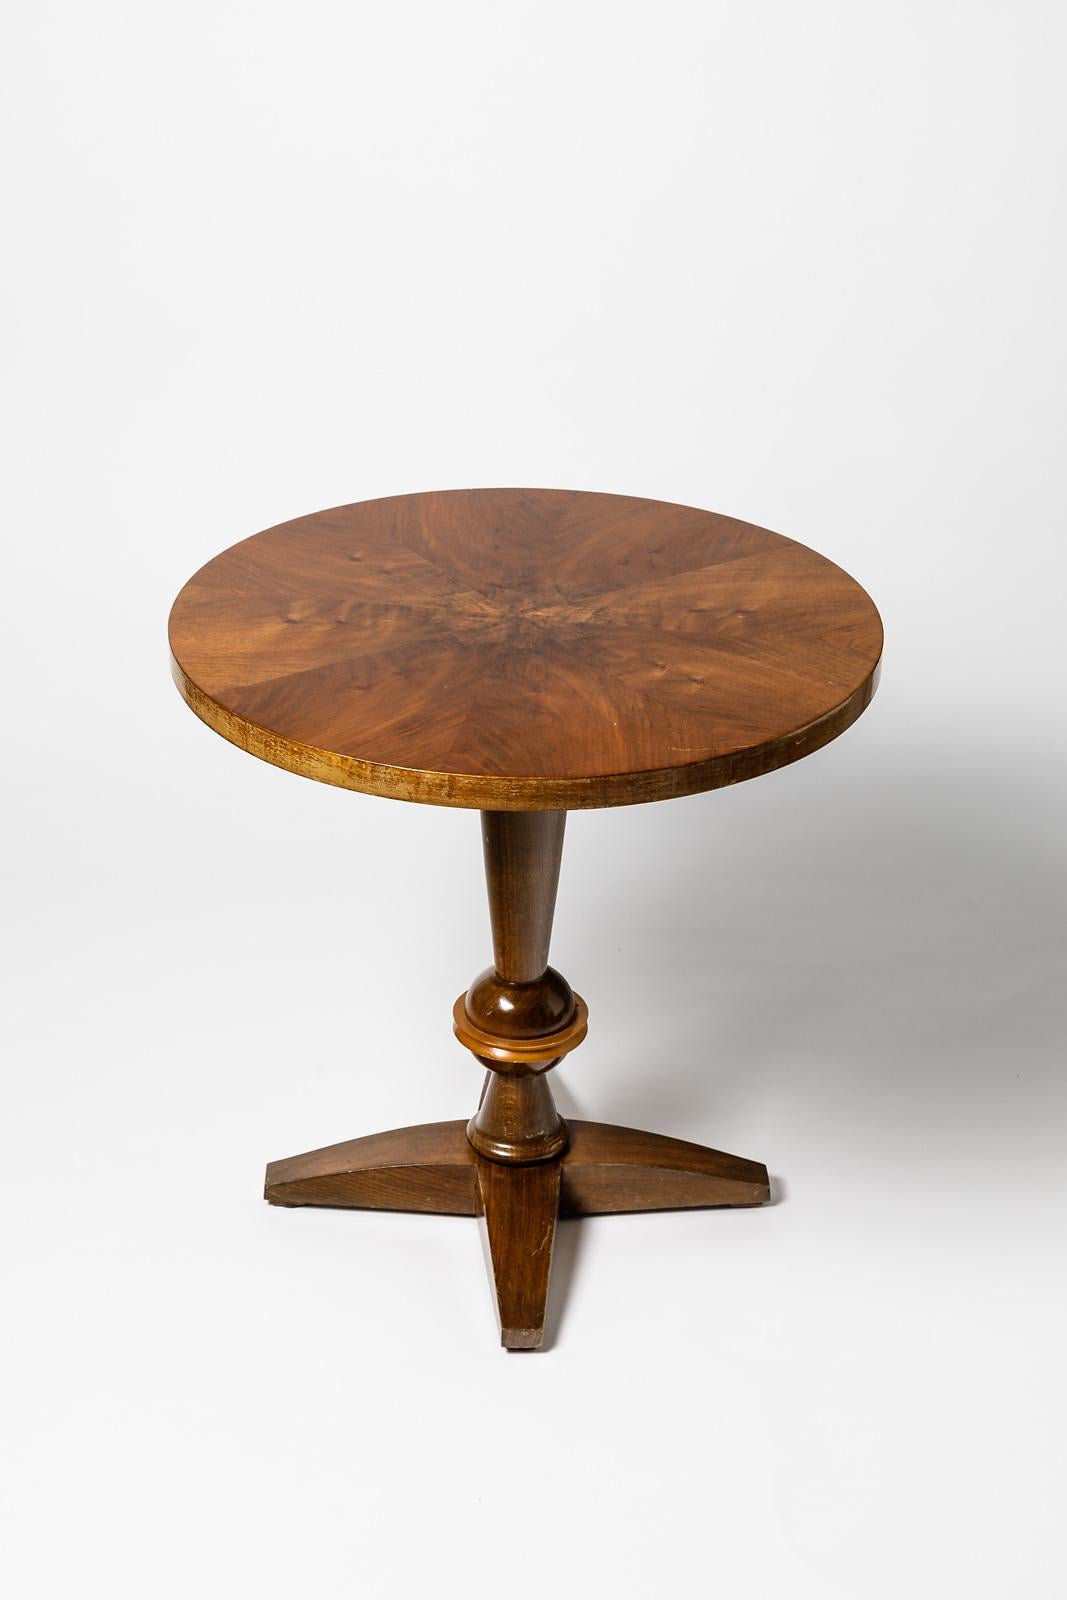 French Art Deco period table

Elegant brown wooden pedestal table realized, circa 1930-1940

In the style of Jean Royère furnitures, original mid-20th century design.

Original good conditions

Measures: Height 54cm, large 54cm.